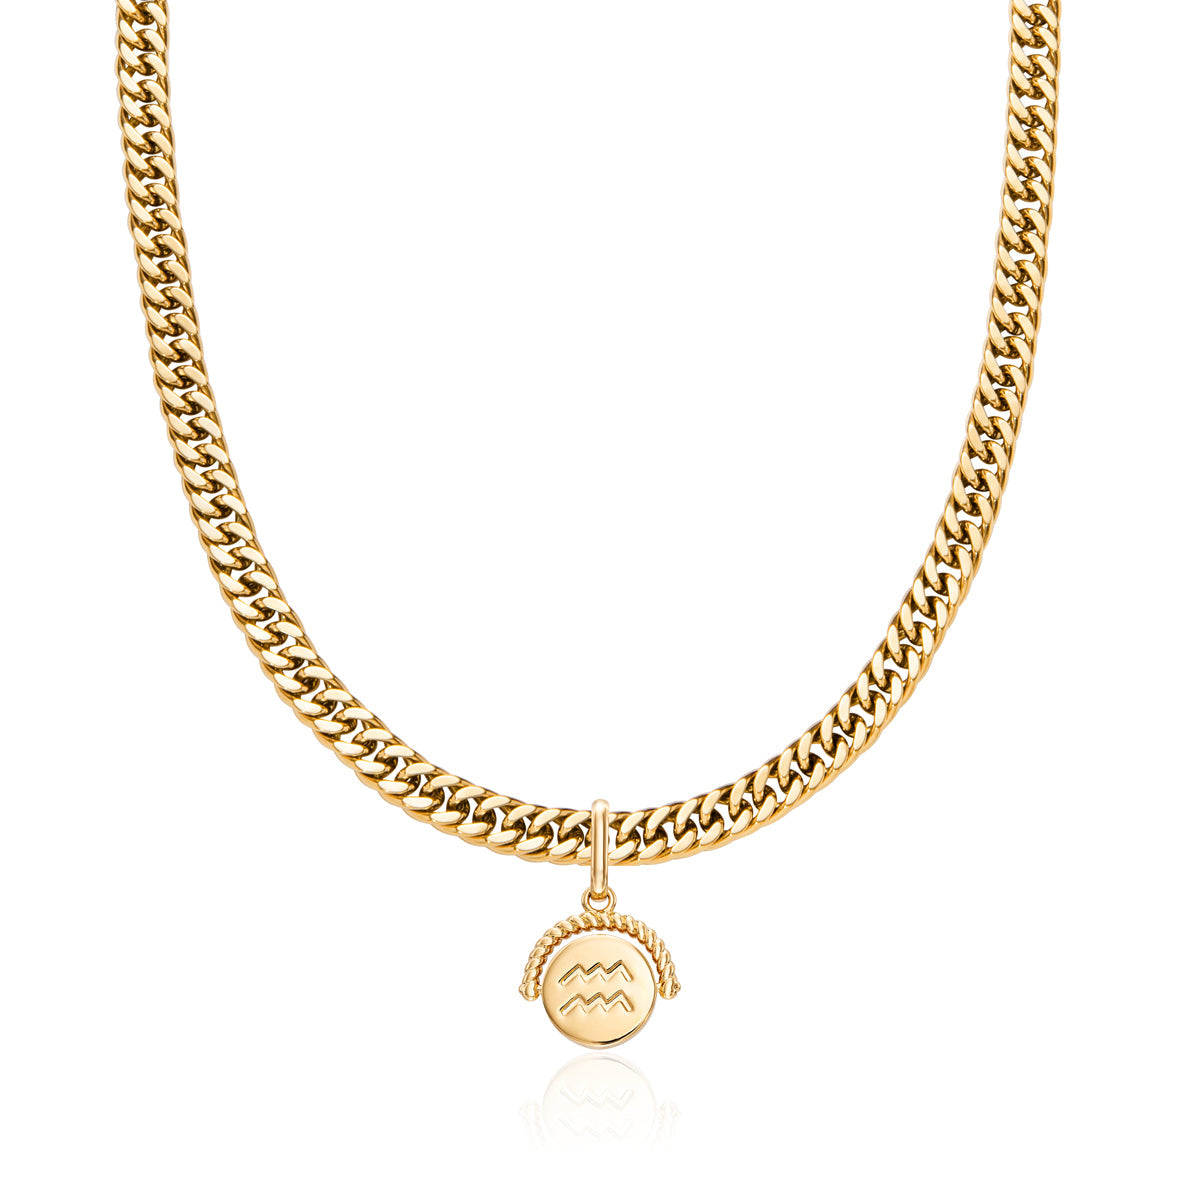 Double coin necklace gold plated - Bandhu